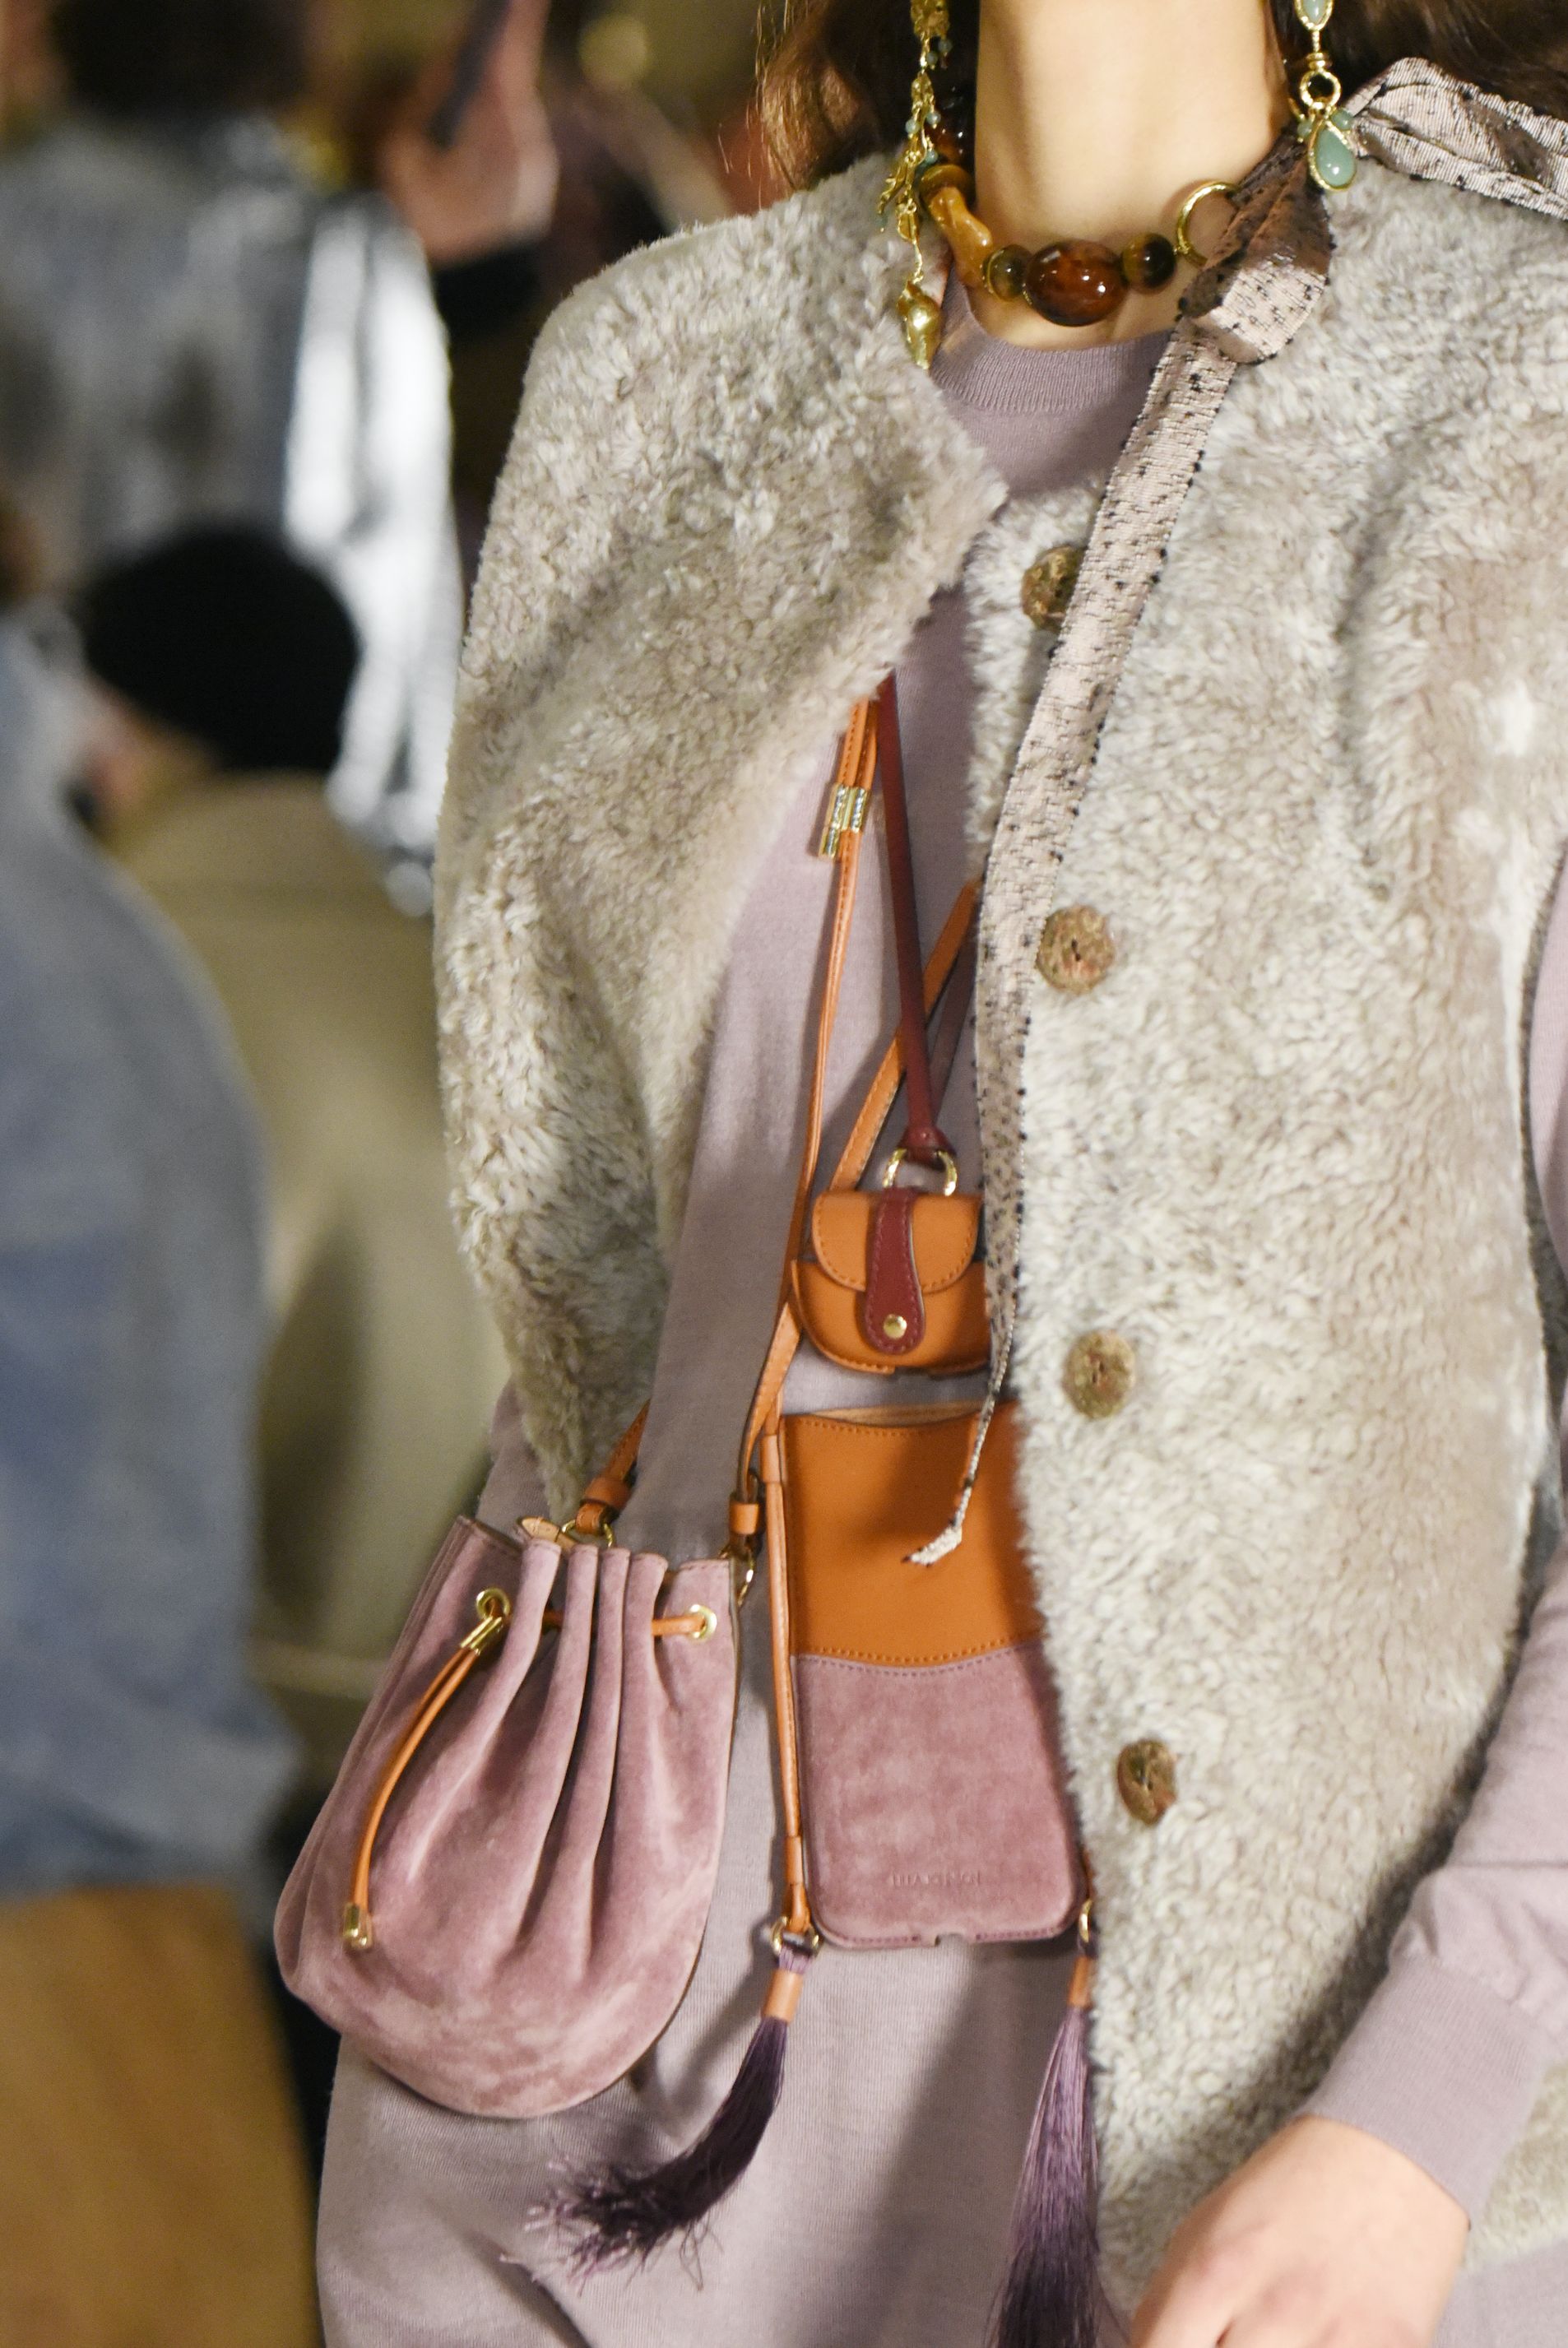 Handbag Trends Worth Trying In Fall 2021 – Style by Jamie Lea